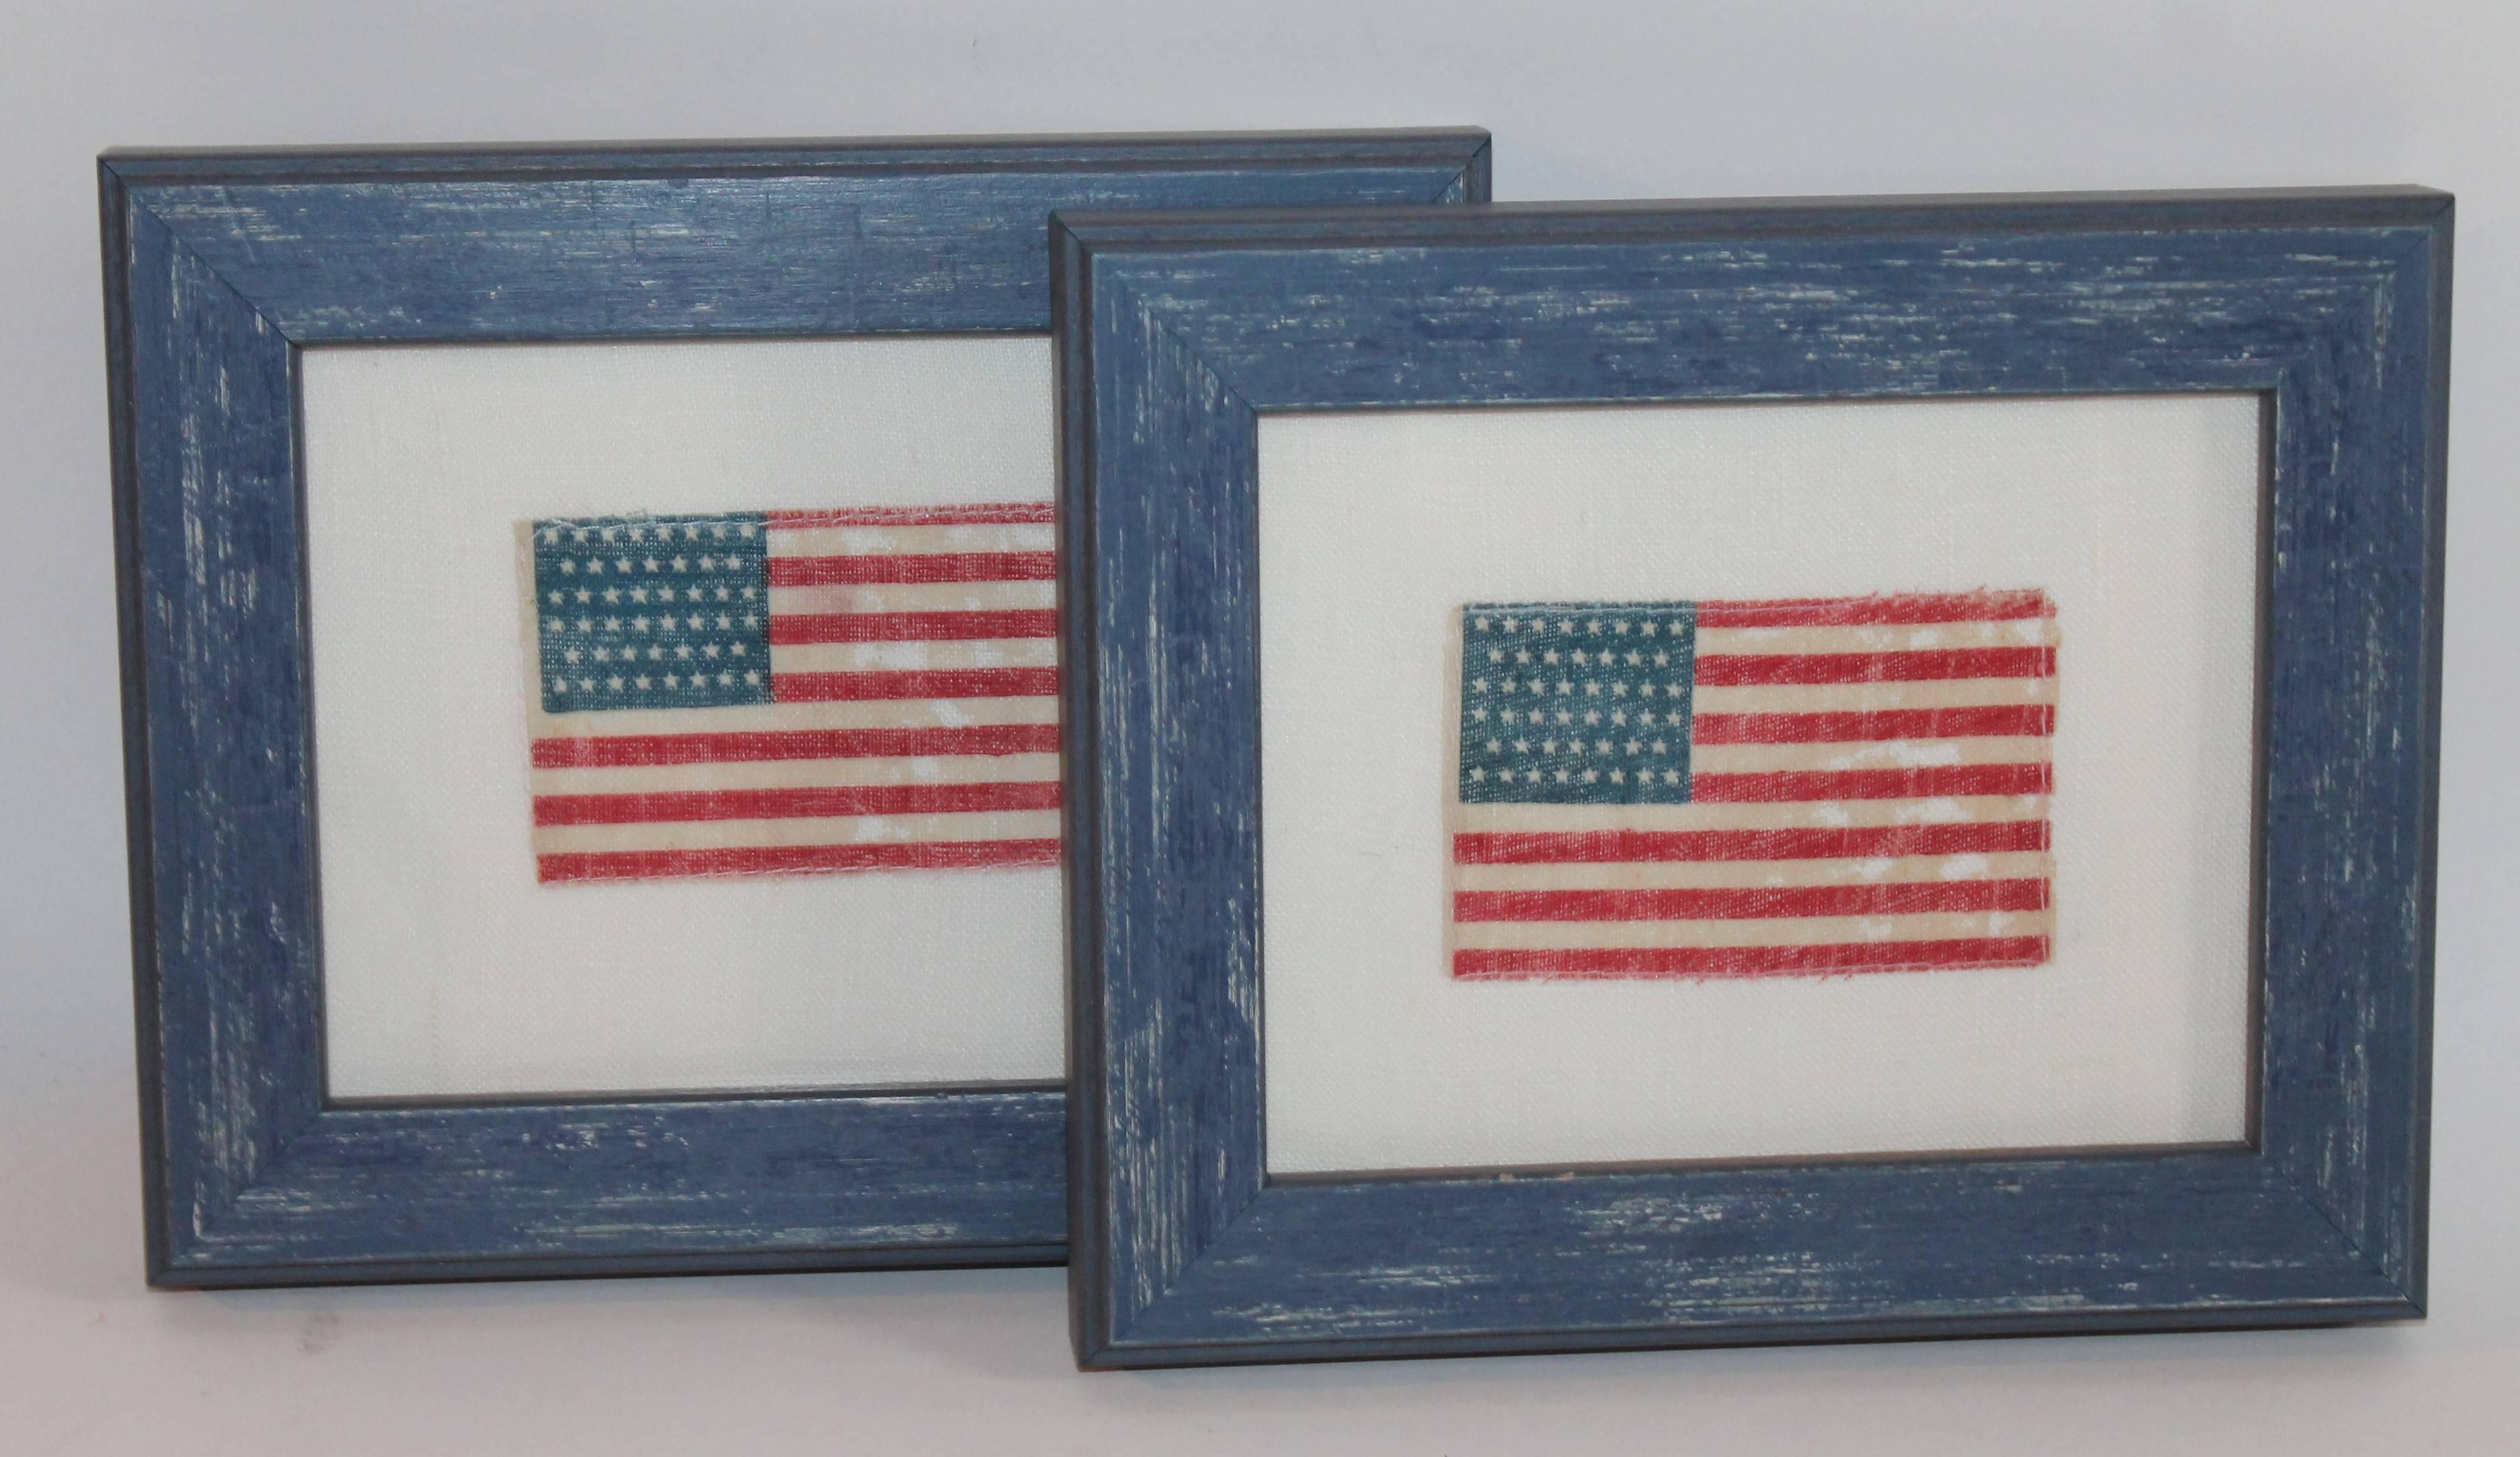 The distressed blue custom-made wood frames contain 46 star parade flags hand-sewn on cream cotton linen are sold as a pair. Great addition to any Americana collection.